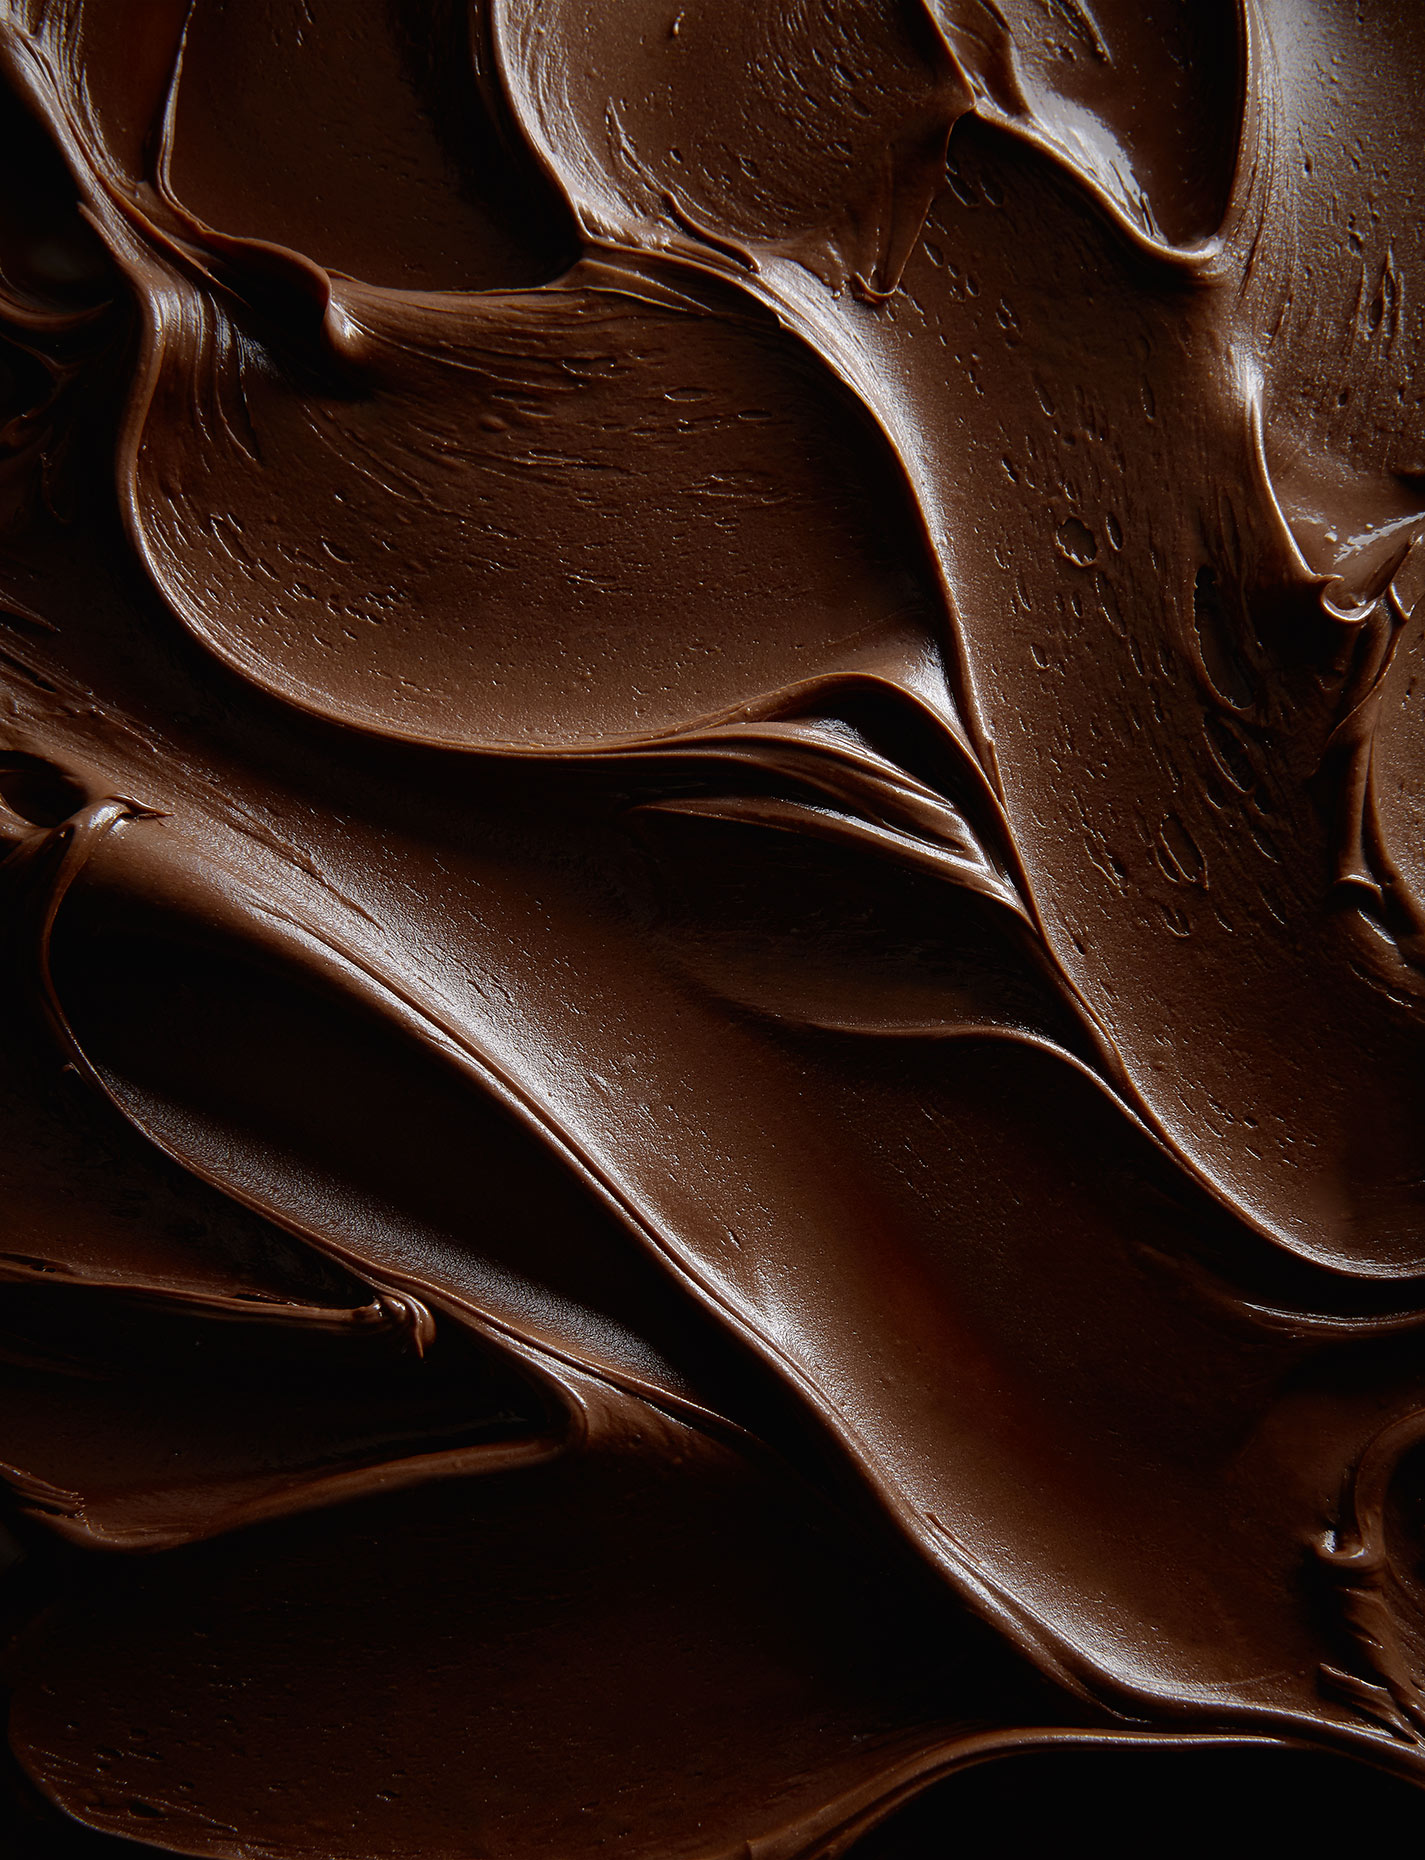 Chocolate_Frosting_Whip_2_2017_1065